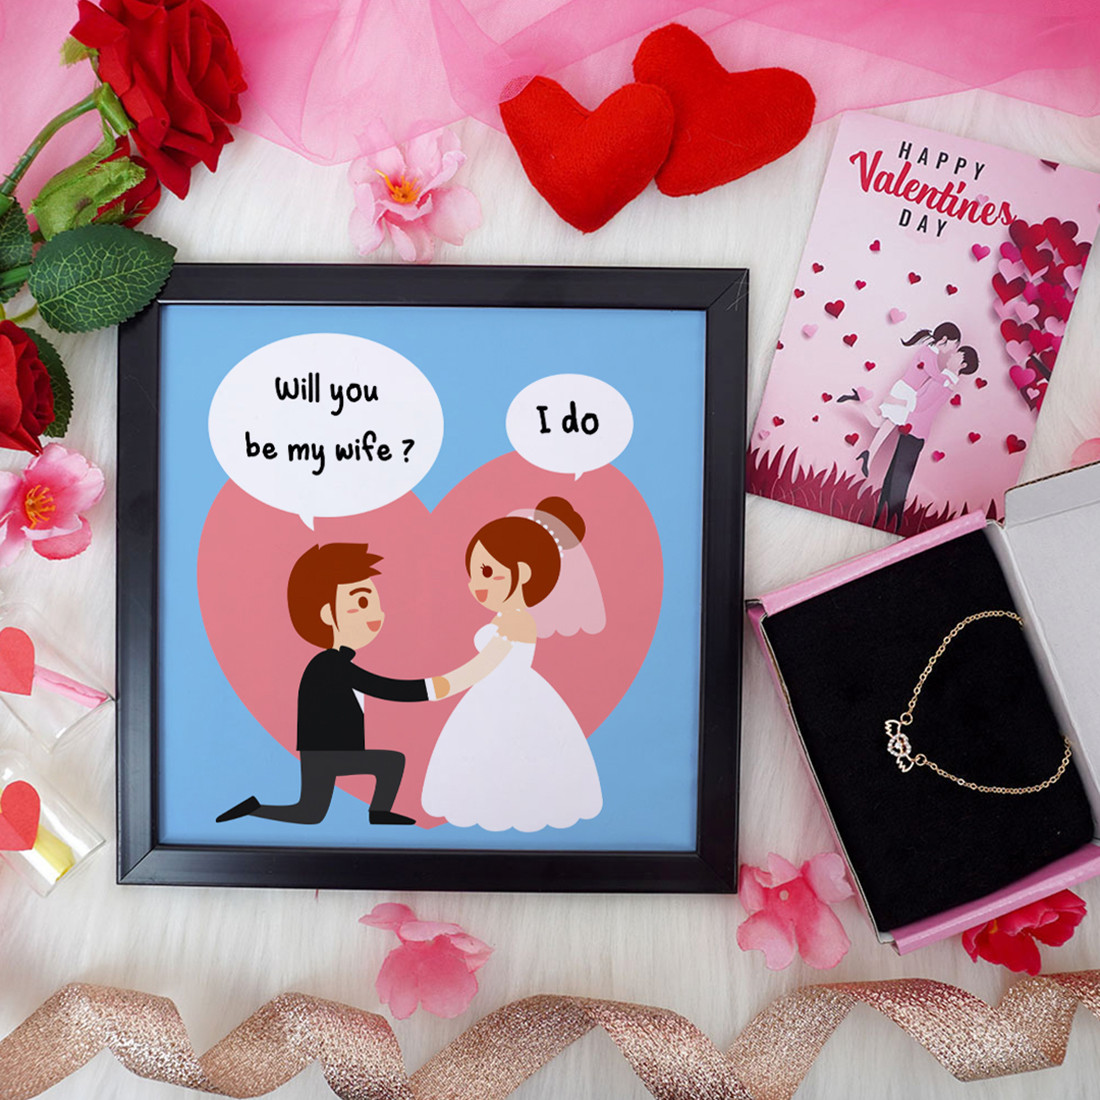 Will You be My Wife ? Valentine Gift Set | Valentine's Day Gifts for Girlfriend | Valentine Gift for Wife | Women's Pendant/Pendant for Girl/Greeting Card | Photo Frame (8x8 Inches)